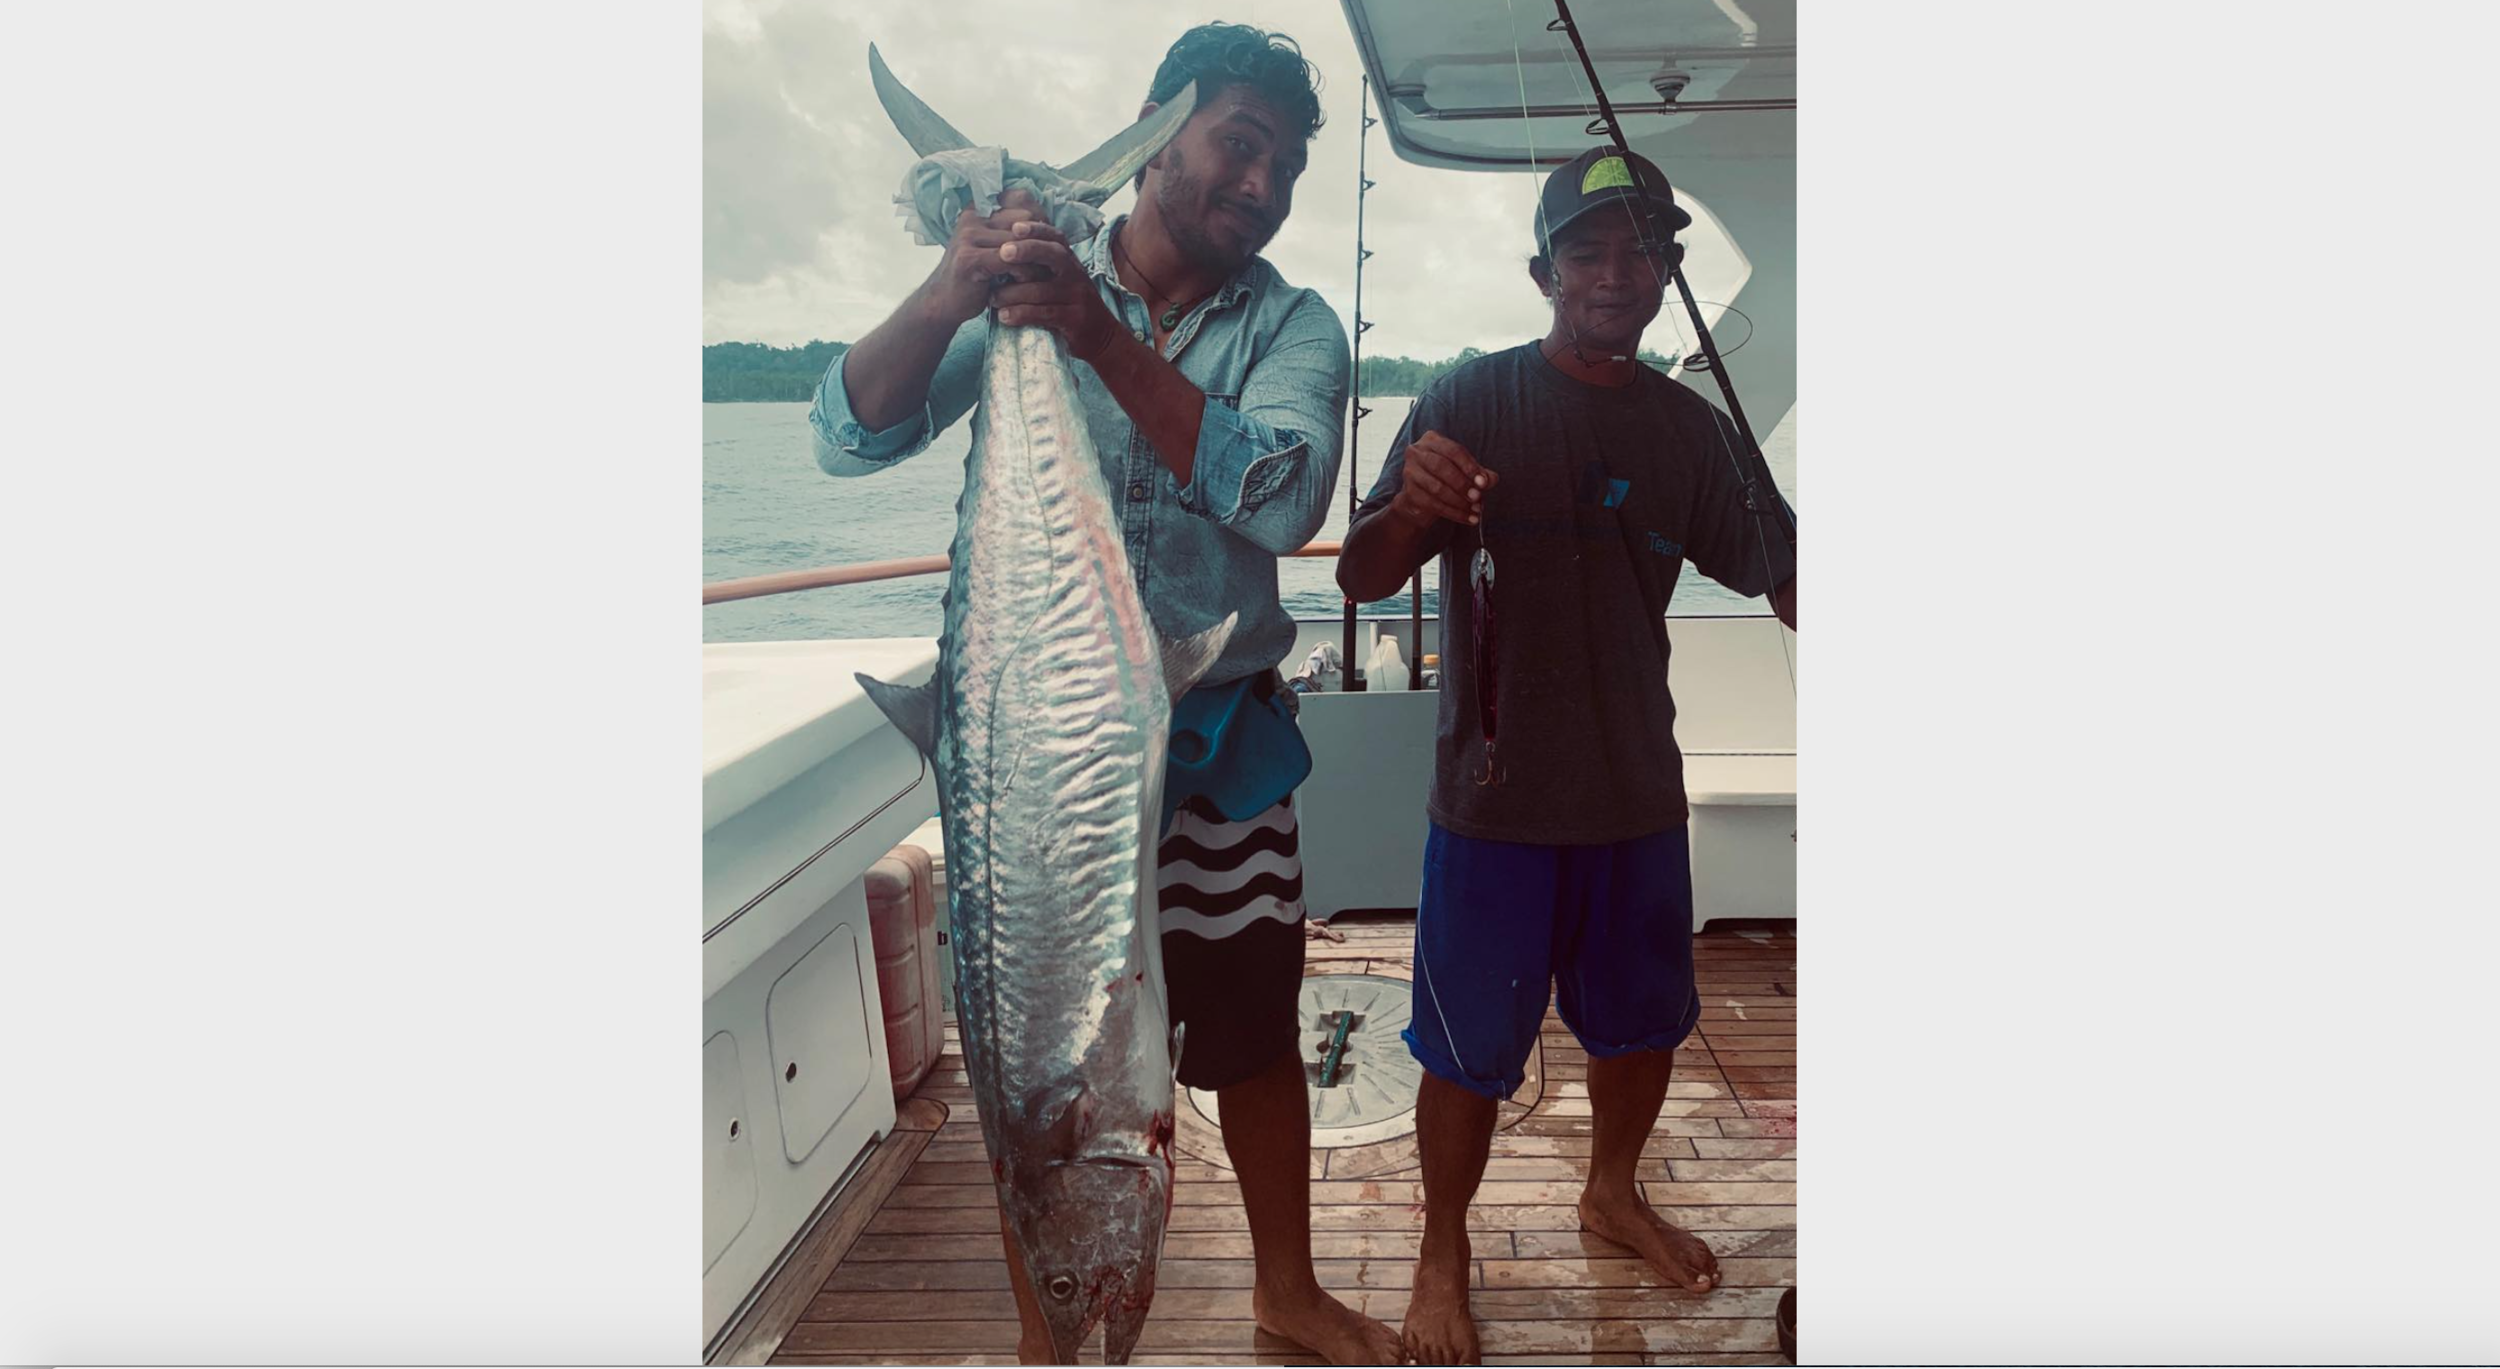  One of the largest Spanish mackerel ever caught aboard the Indies Trader 3 - fresh fish for days 